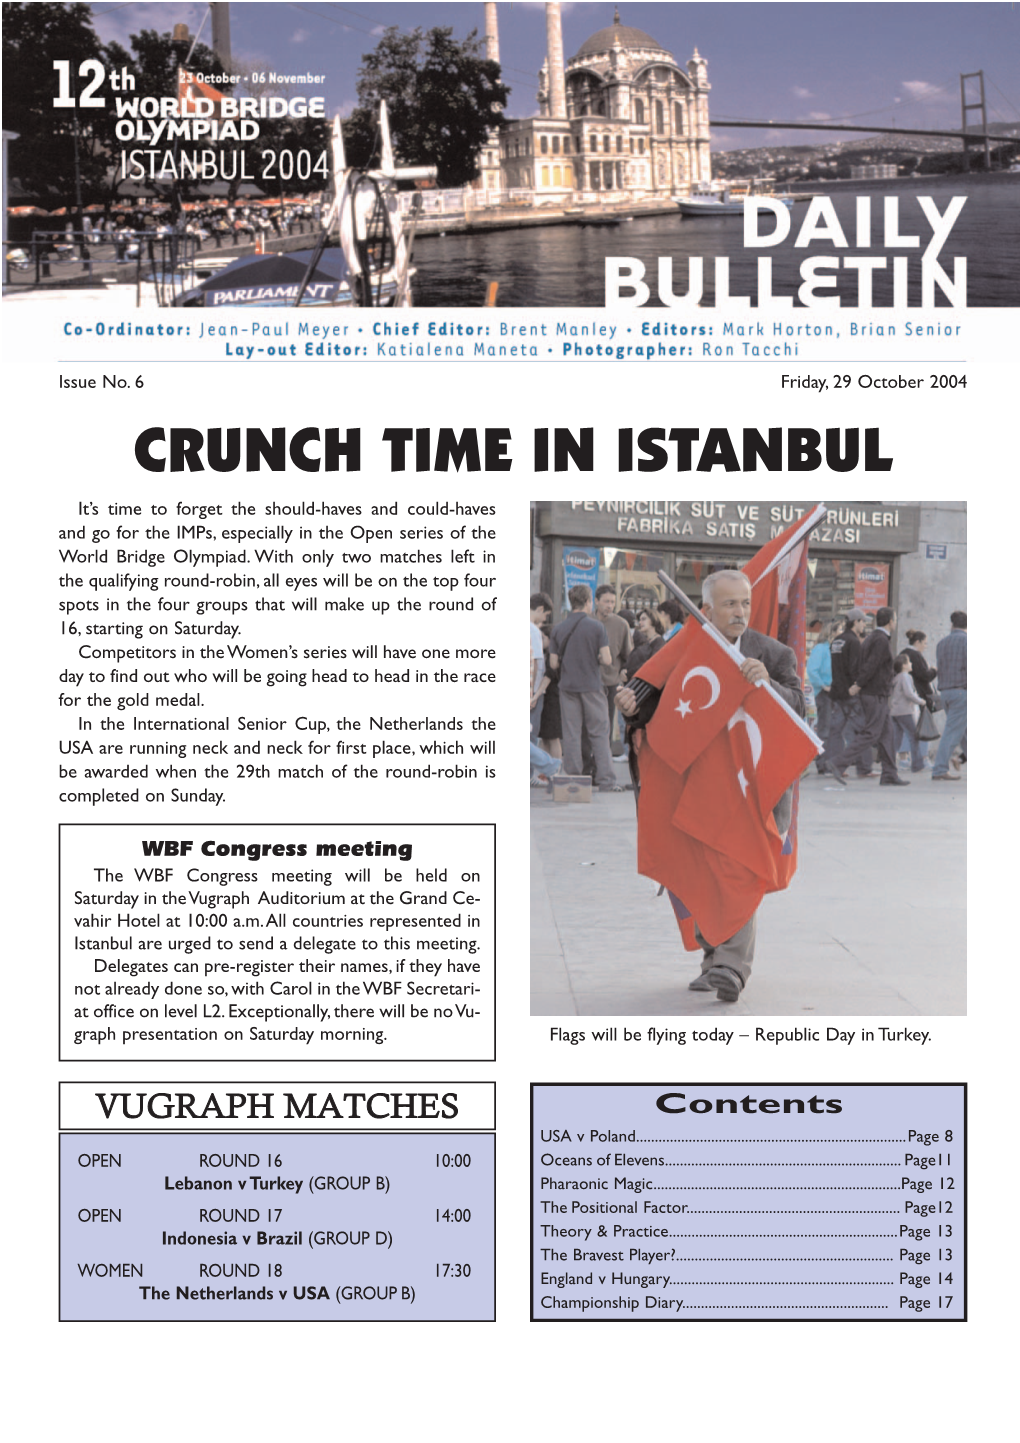 CRUNCH TIME in ISTANBUL It’S Time to Forget the Should-Haves and Could-Haves and Go for the Imps, Especially in the Open Series of the World Bridge Olympiad